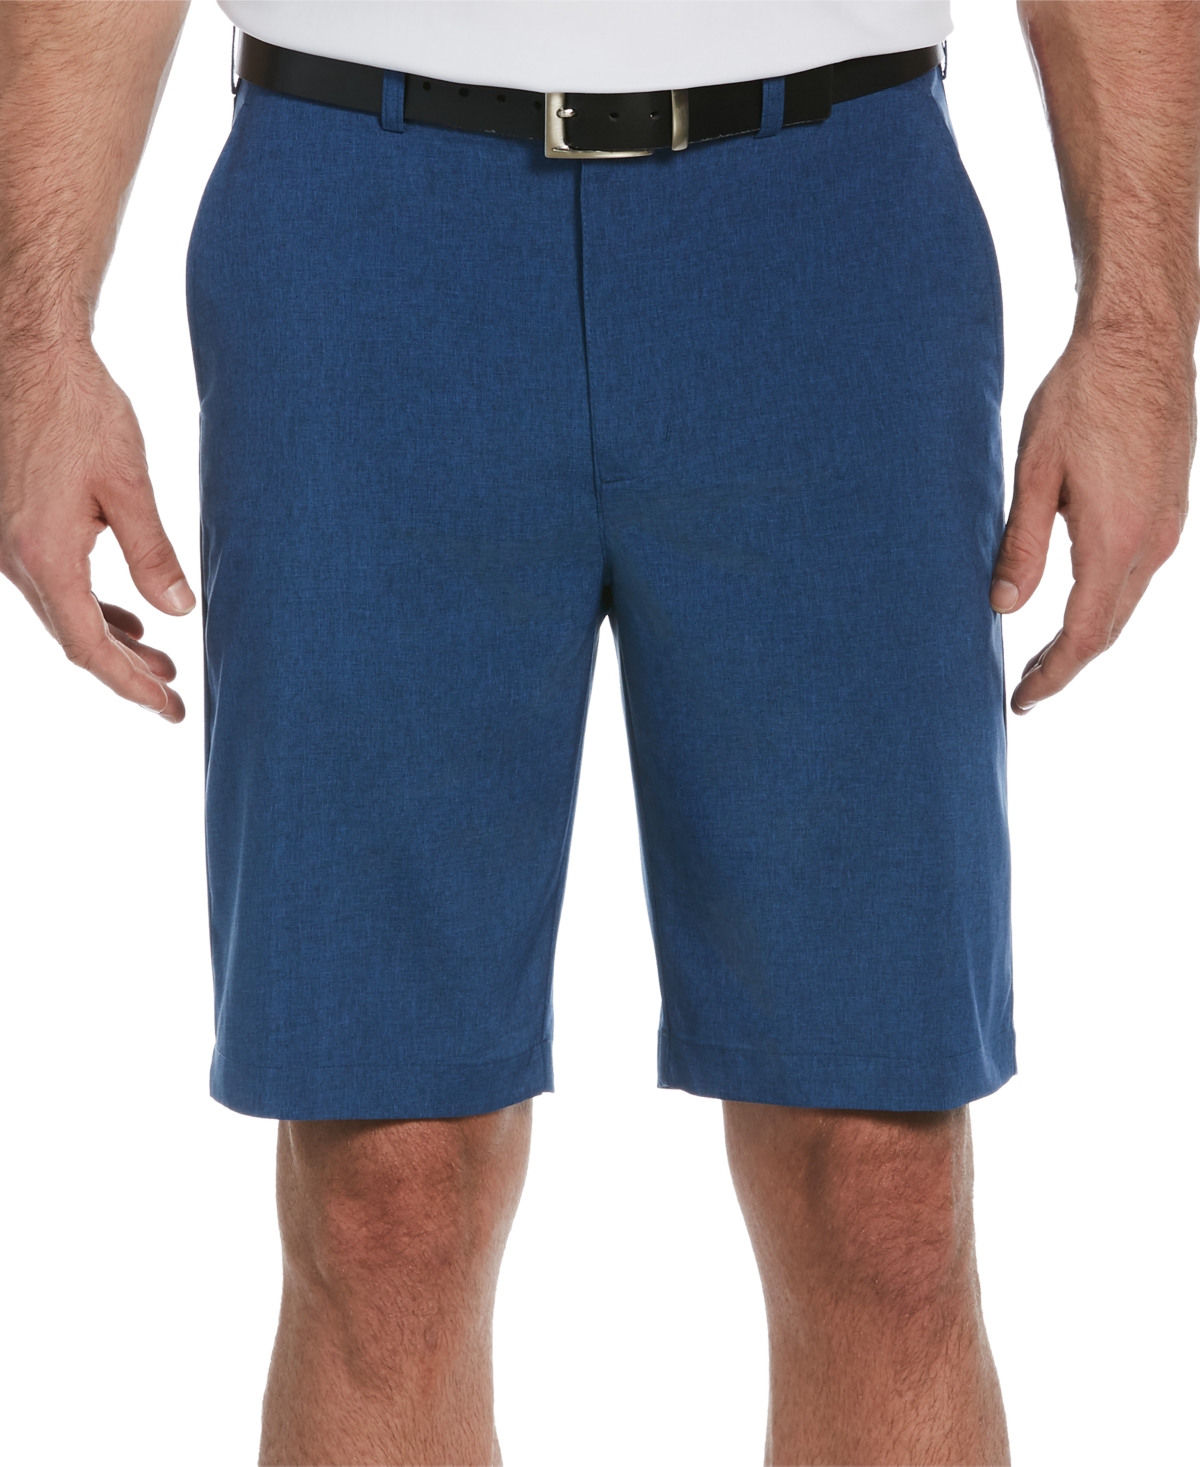 Men's Flat Front Heather Golf Shorts with Active Waistband - Deep Navy Heather